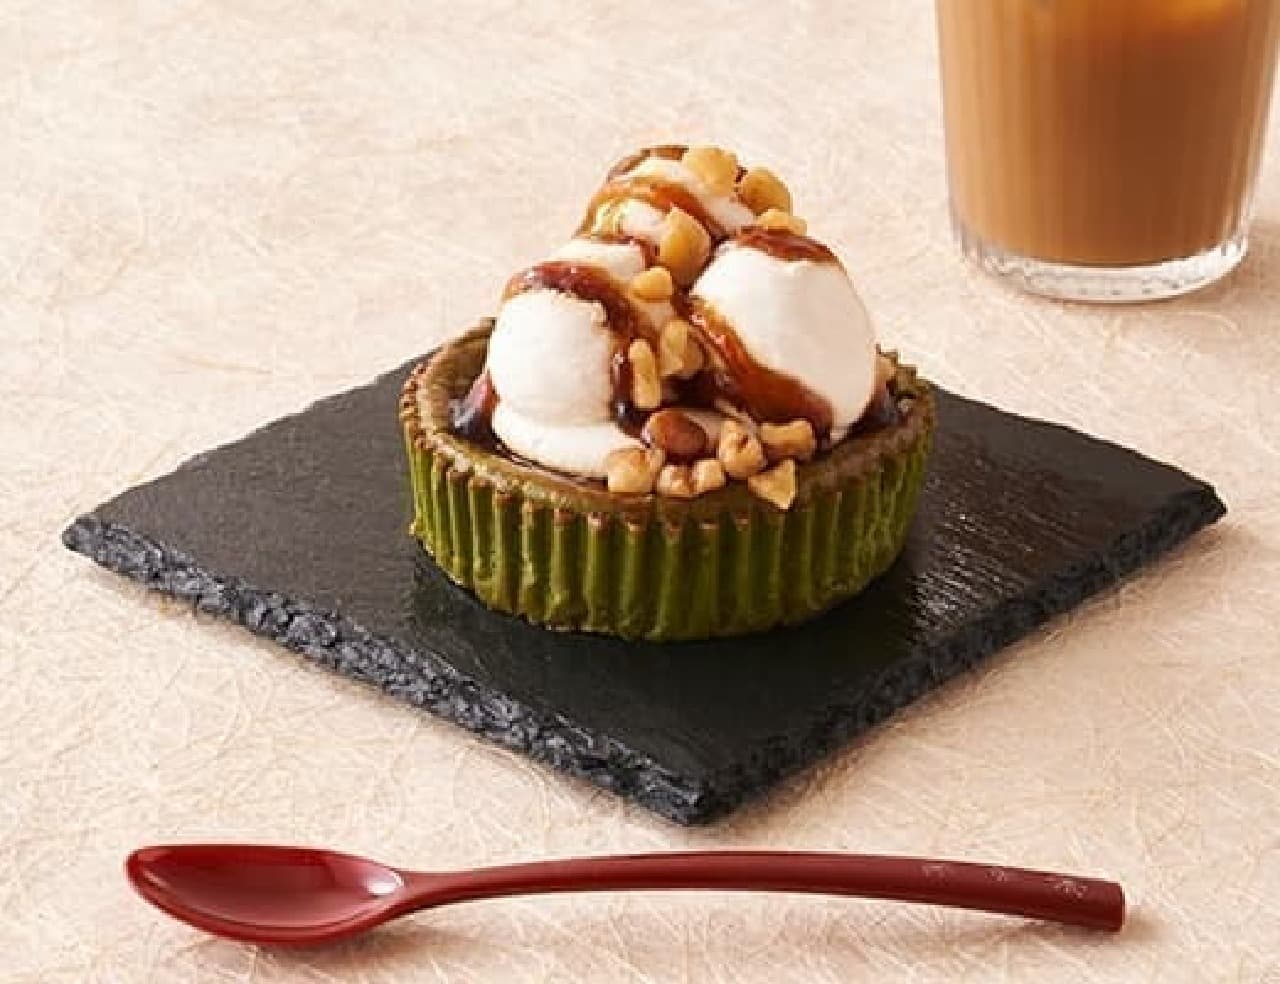 Lawson's "Matcha Basque -Basque-style Cheese Cake-"